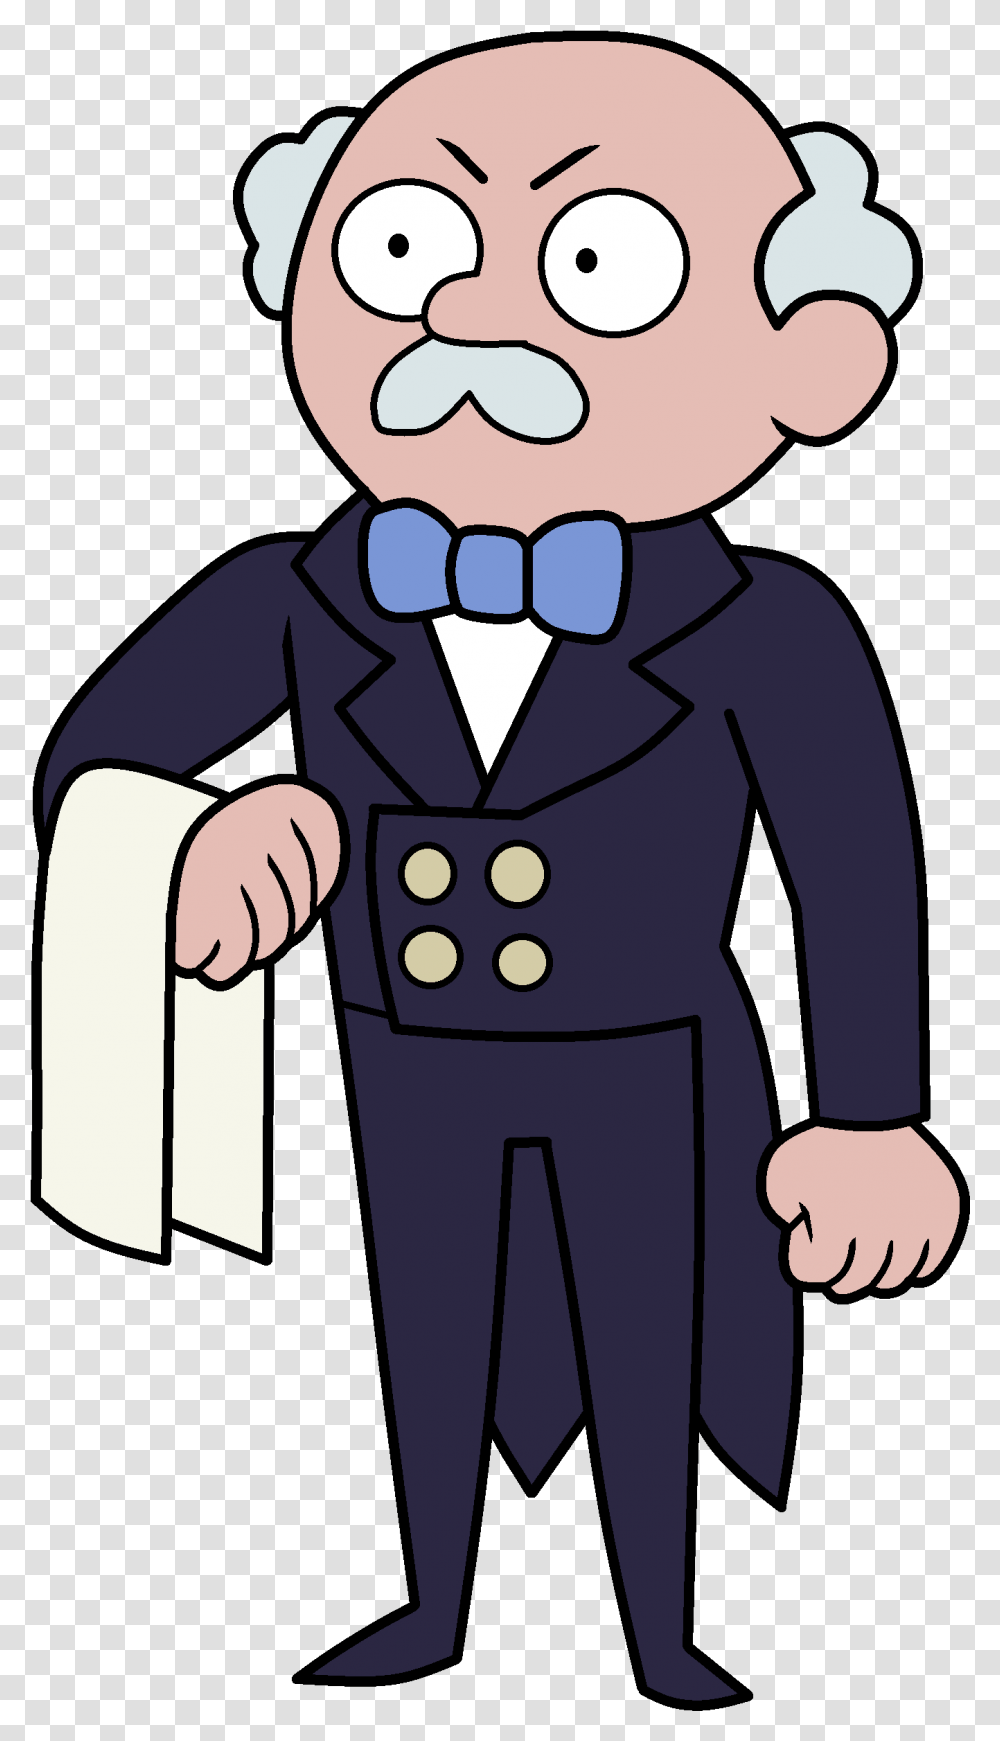 Butler 1 Image Randy Anderson Steven Universe, Person, Human, Tie, Accessories Transparent Png